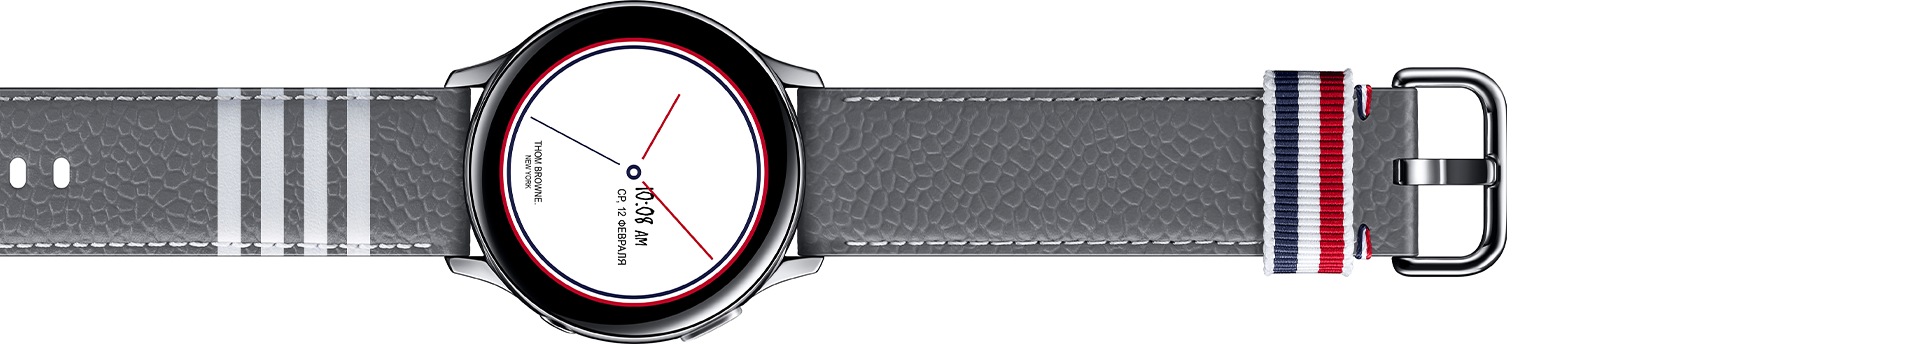 Galaxy Watch Active2 Thom Browne Edition shown with the exclusive watch face and leather strap